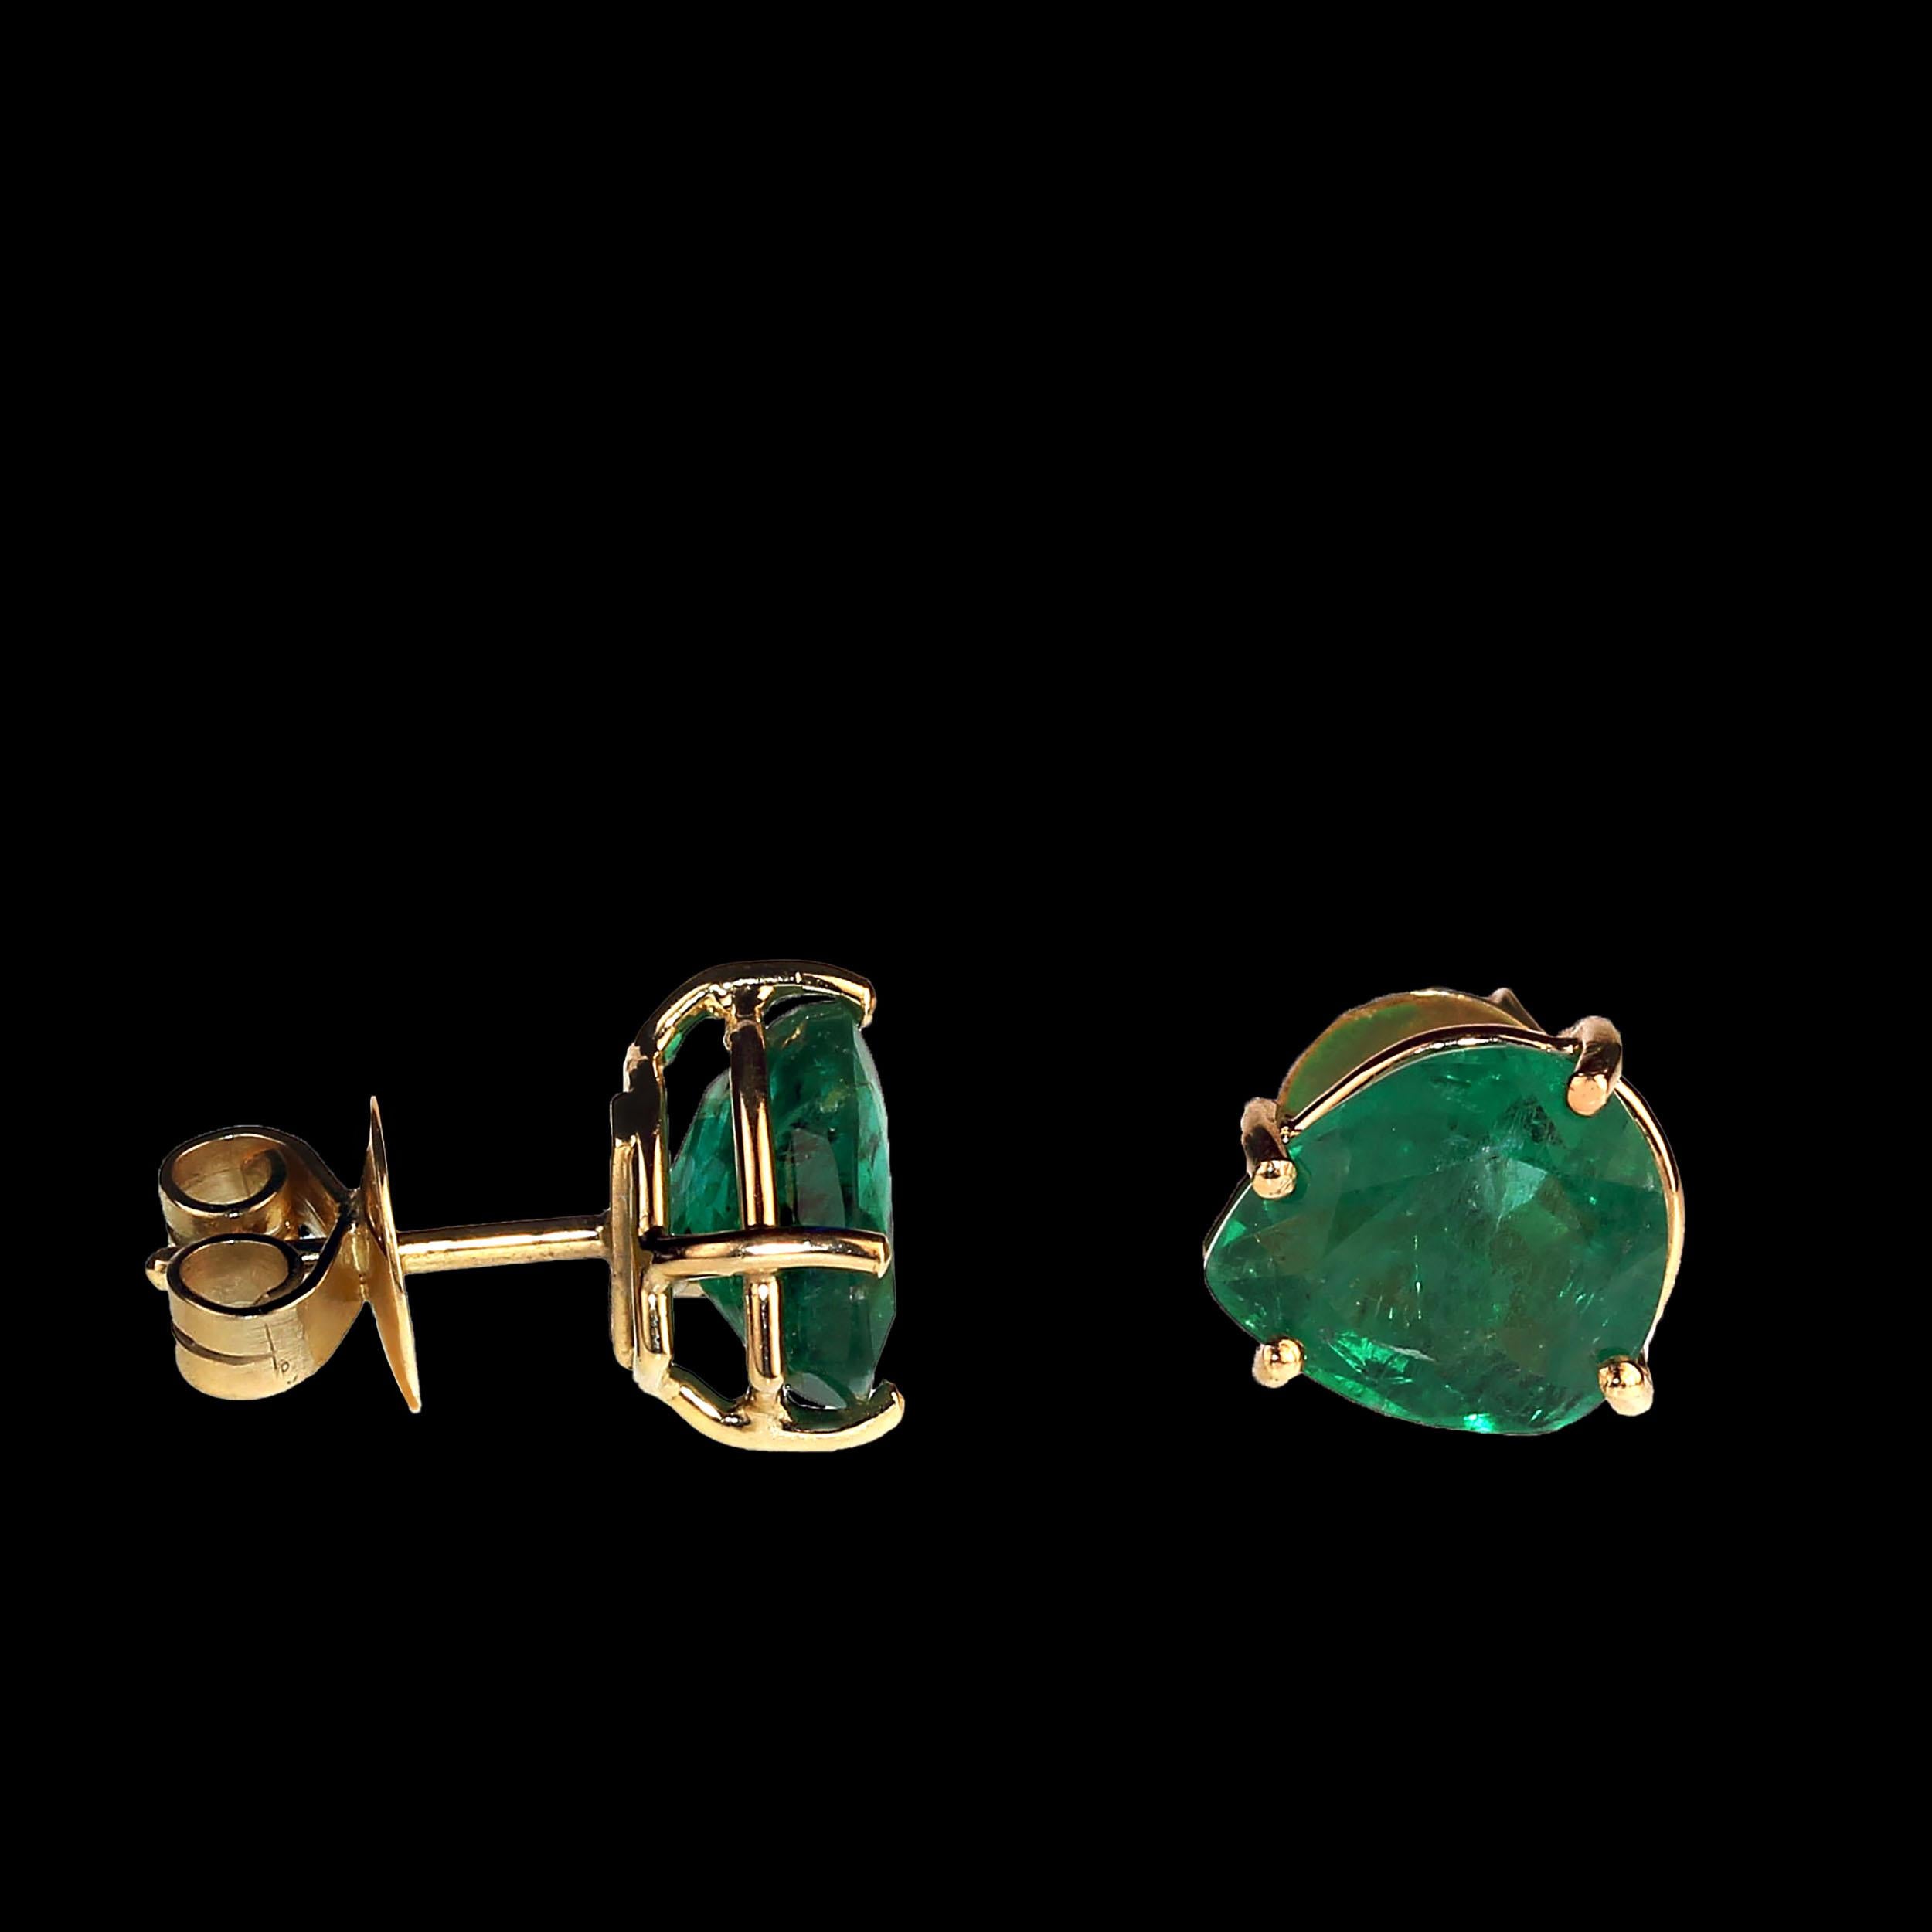 Artisan AJD Awesomely Elegant Emerald Earrings in 18K Yellow Gold For Sale